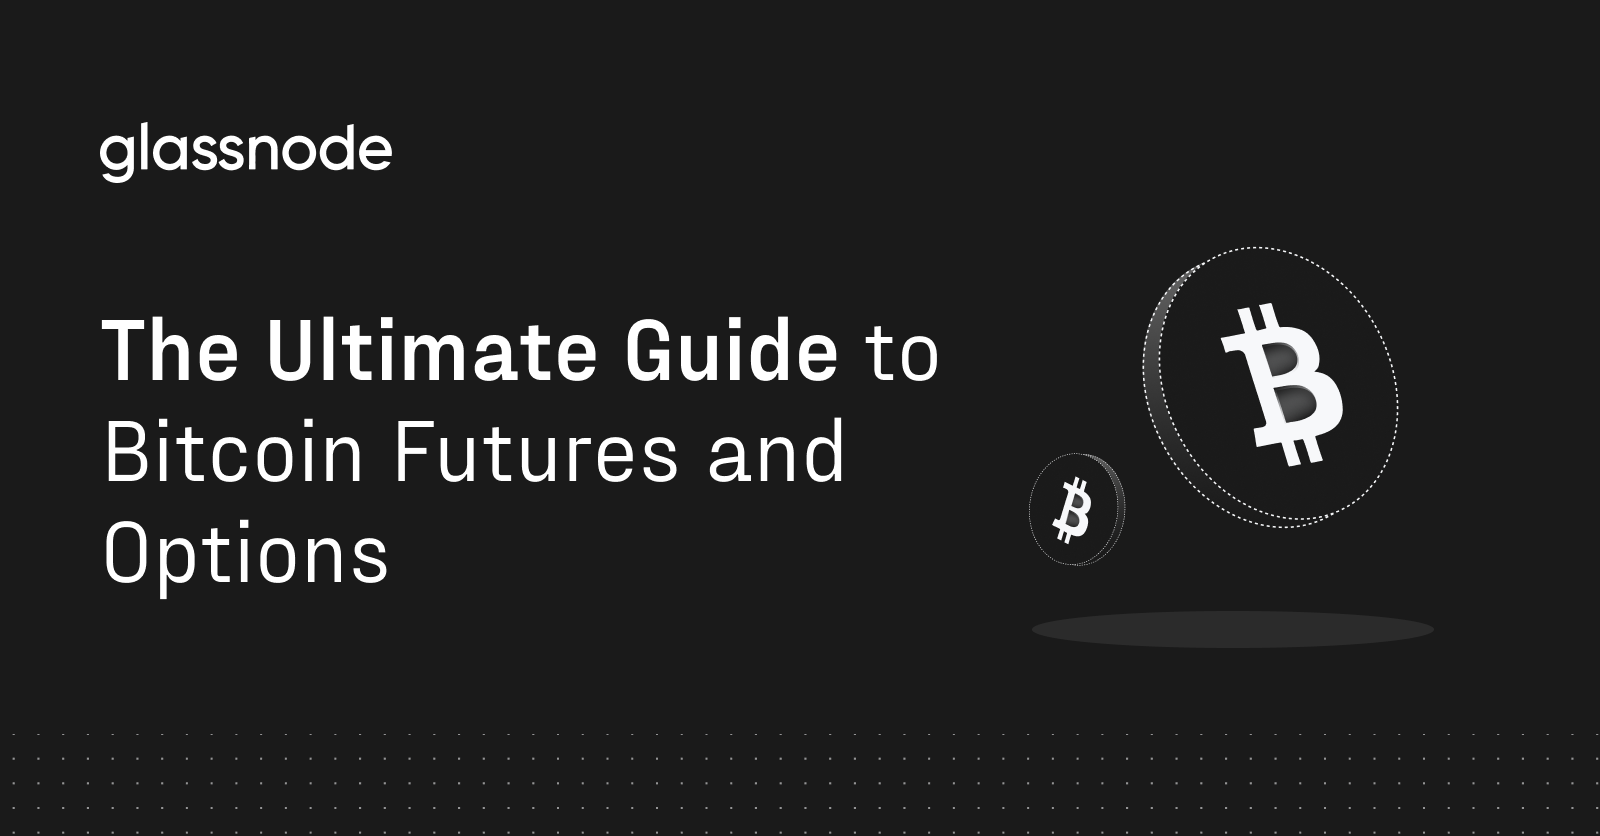 The Ultimate Guide to Bitcoin Futures and Options